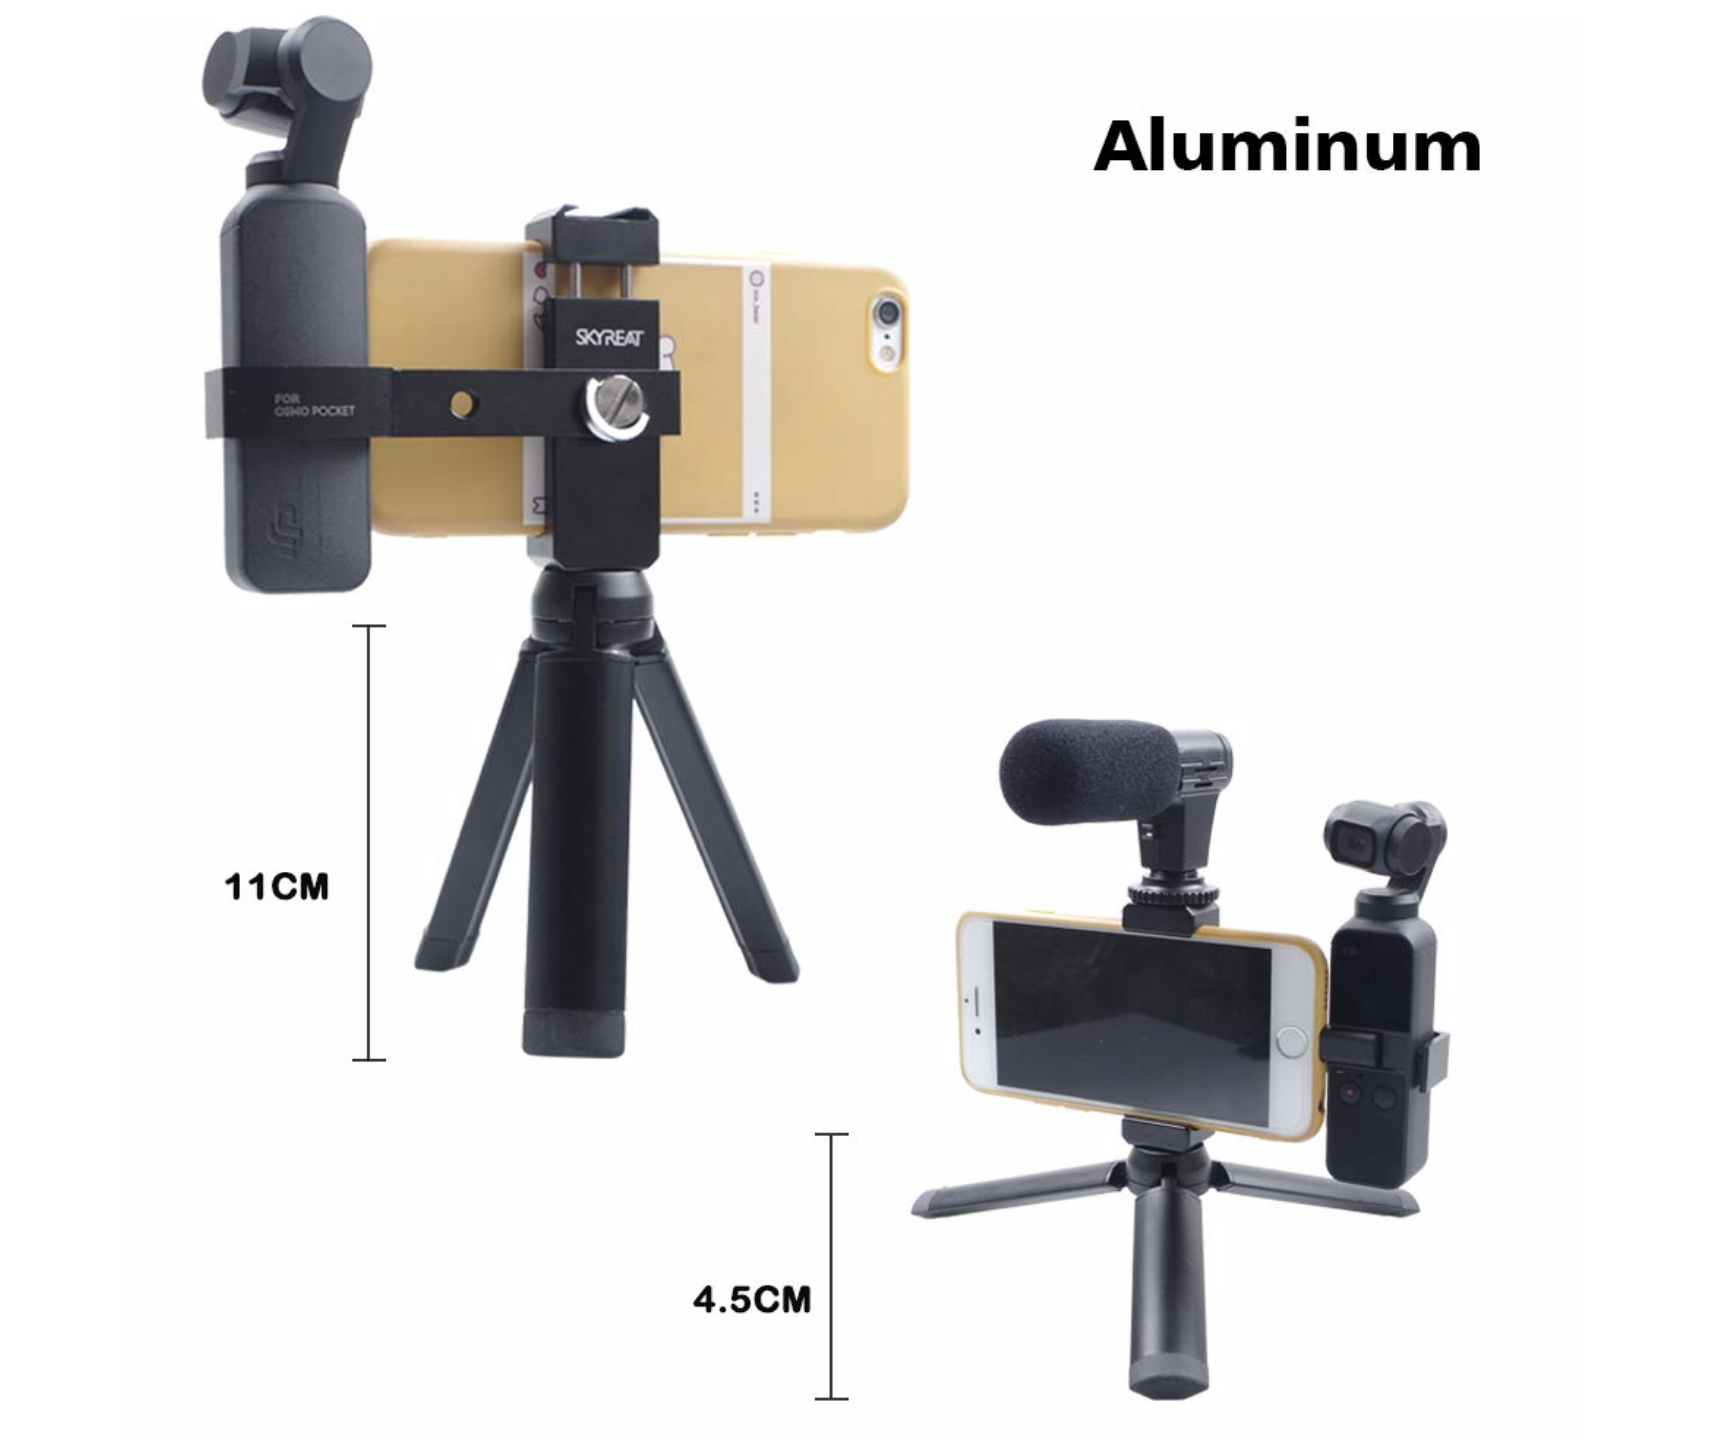 Woohoot Mini Tripod Stand Compatible for OSMO Pocket OSMO Mobile 3 2 Gimbal Selfie Stick Monopod Osmo Handle Grip Stabilizer